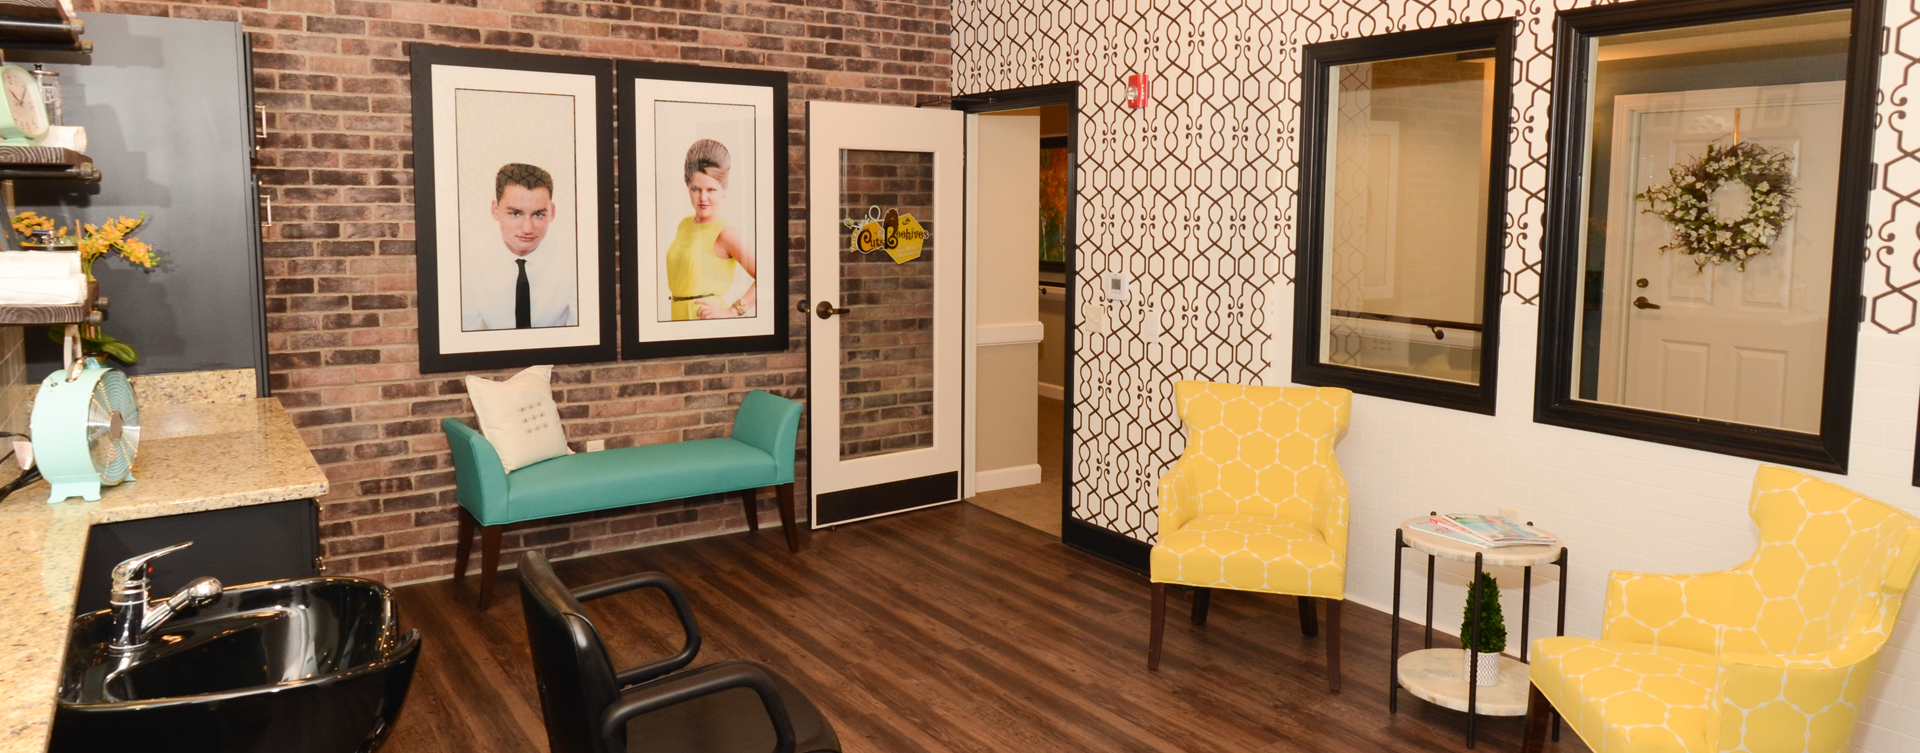 Strut on in and find out what the buzz is all about in the salon at Bickford of Gurnee